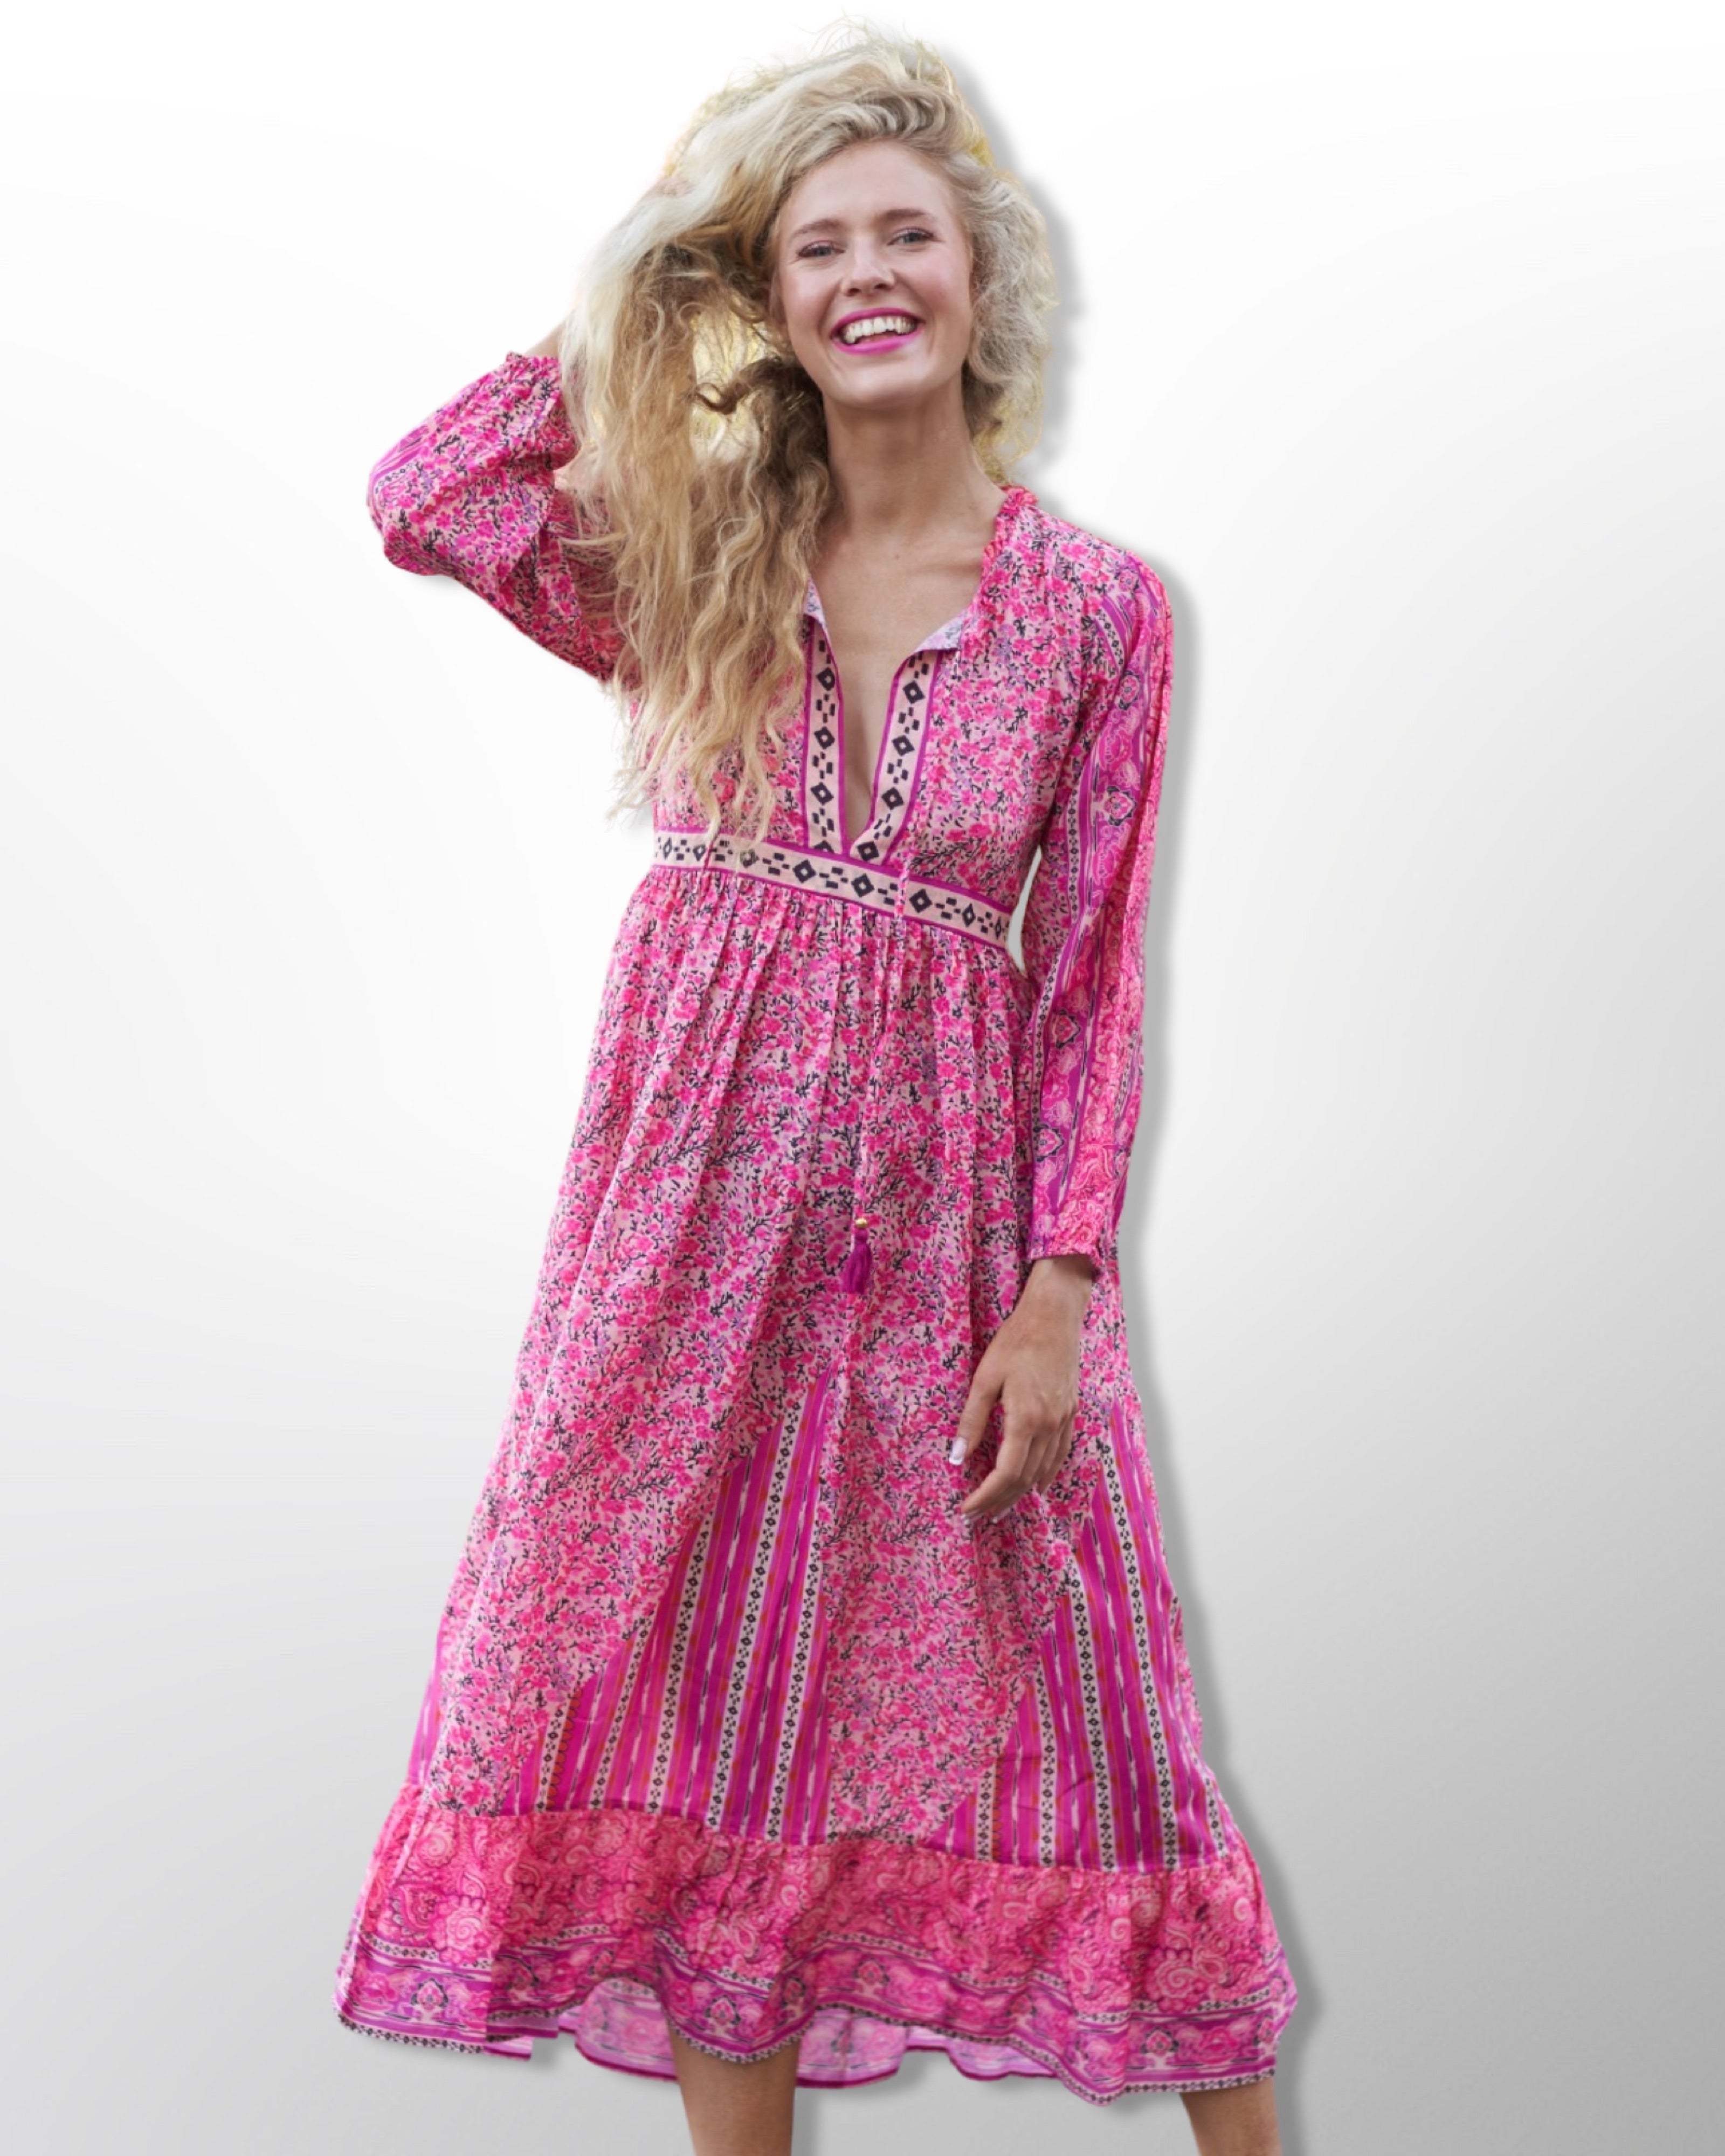 Say Hello to Our Comfy Floral Maxi Dress in Gorgeous Pink Hues , Meets slightly above the ankle with Balloon Sleeves , giving it that fun Bohemian Vibe  . It’s Flowy and Flirty , Light and Breezy , and Oh So Comfy . Tie Up Strings at the Collar and Below the Bust , make it for Easy Adjustability . Handmade With Love .  100% Cotton  Wash Separately in Cold Water   Iron On Low  Do Not Bleach   Made in India 